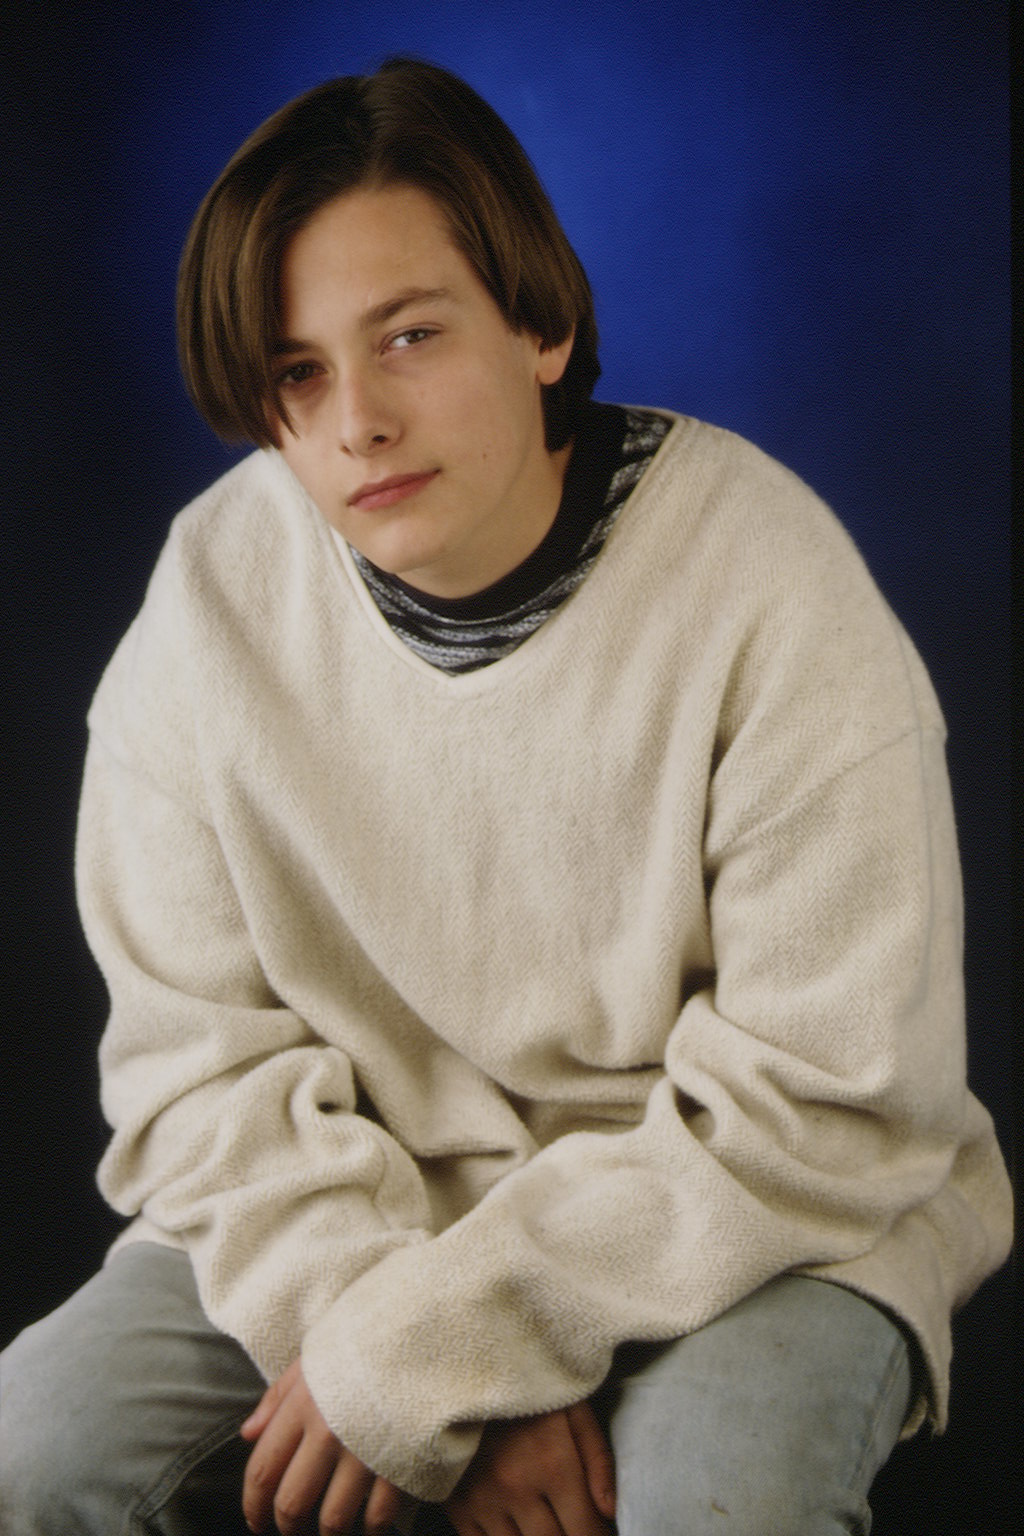 Edward Furlong at the 20th American Film Festival in Deauville on September 7, 1994 | Source: Getty Images